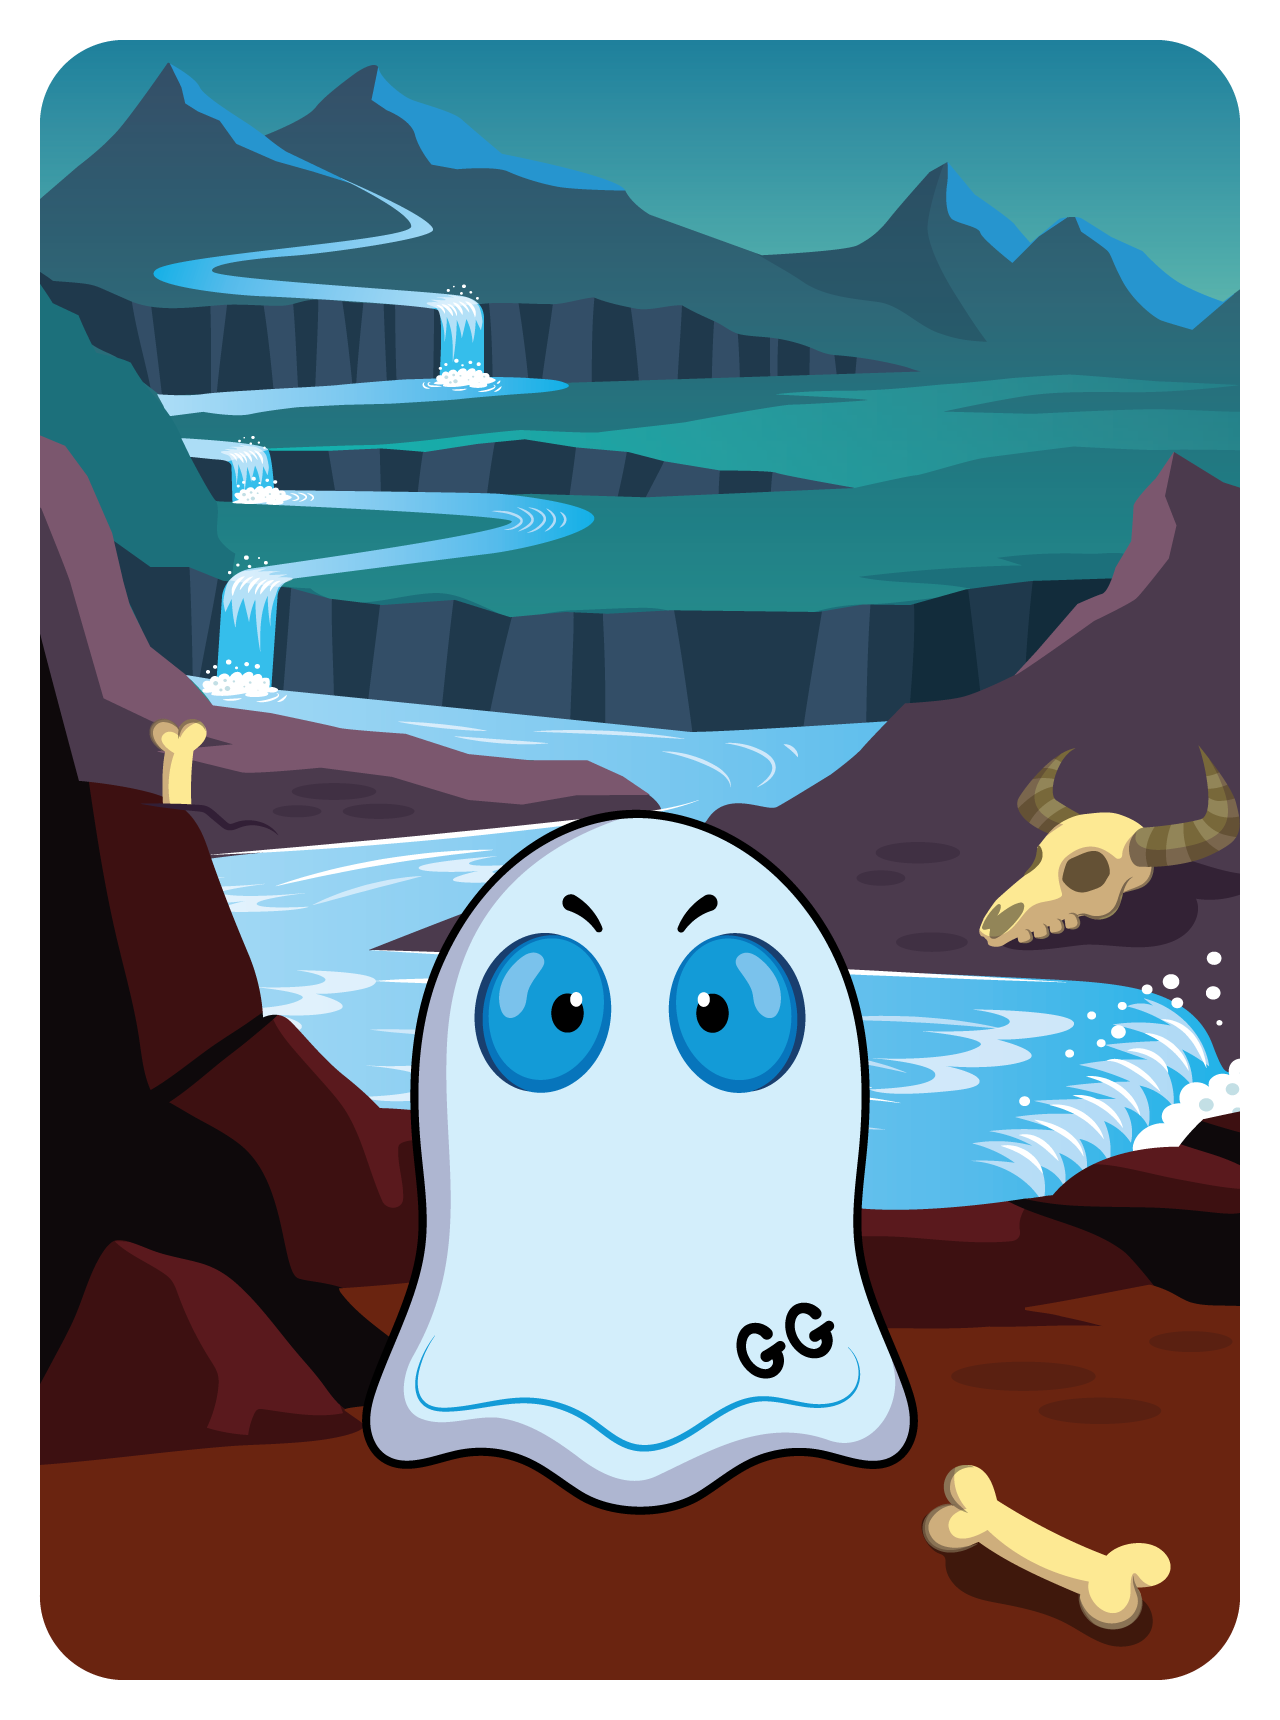 Gritty Ghost #52960